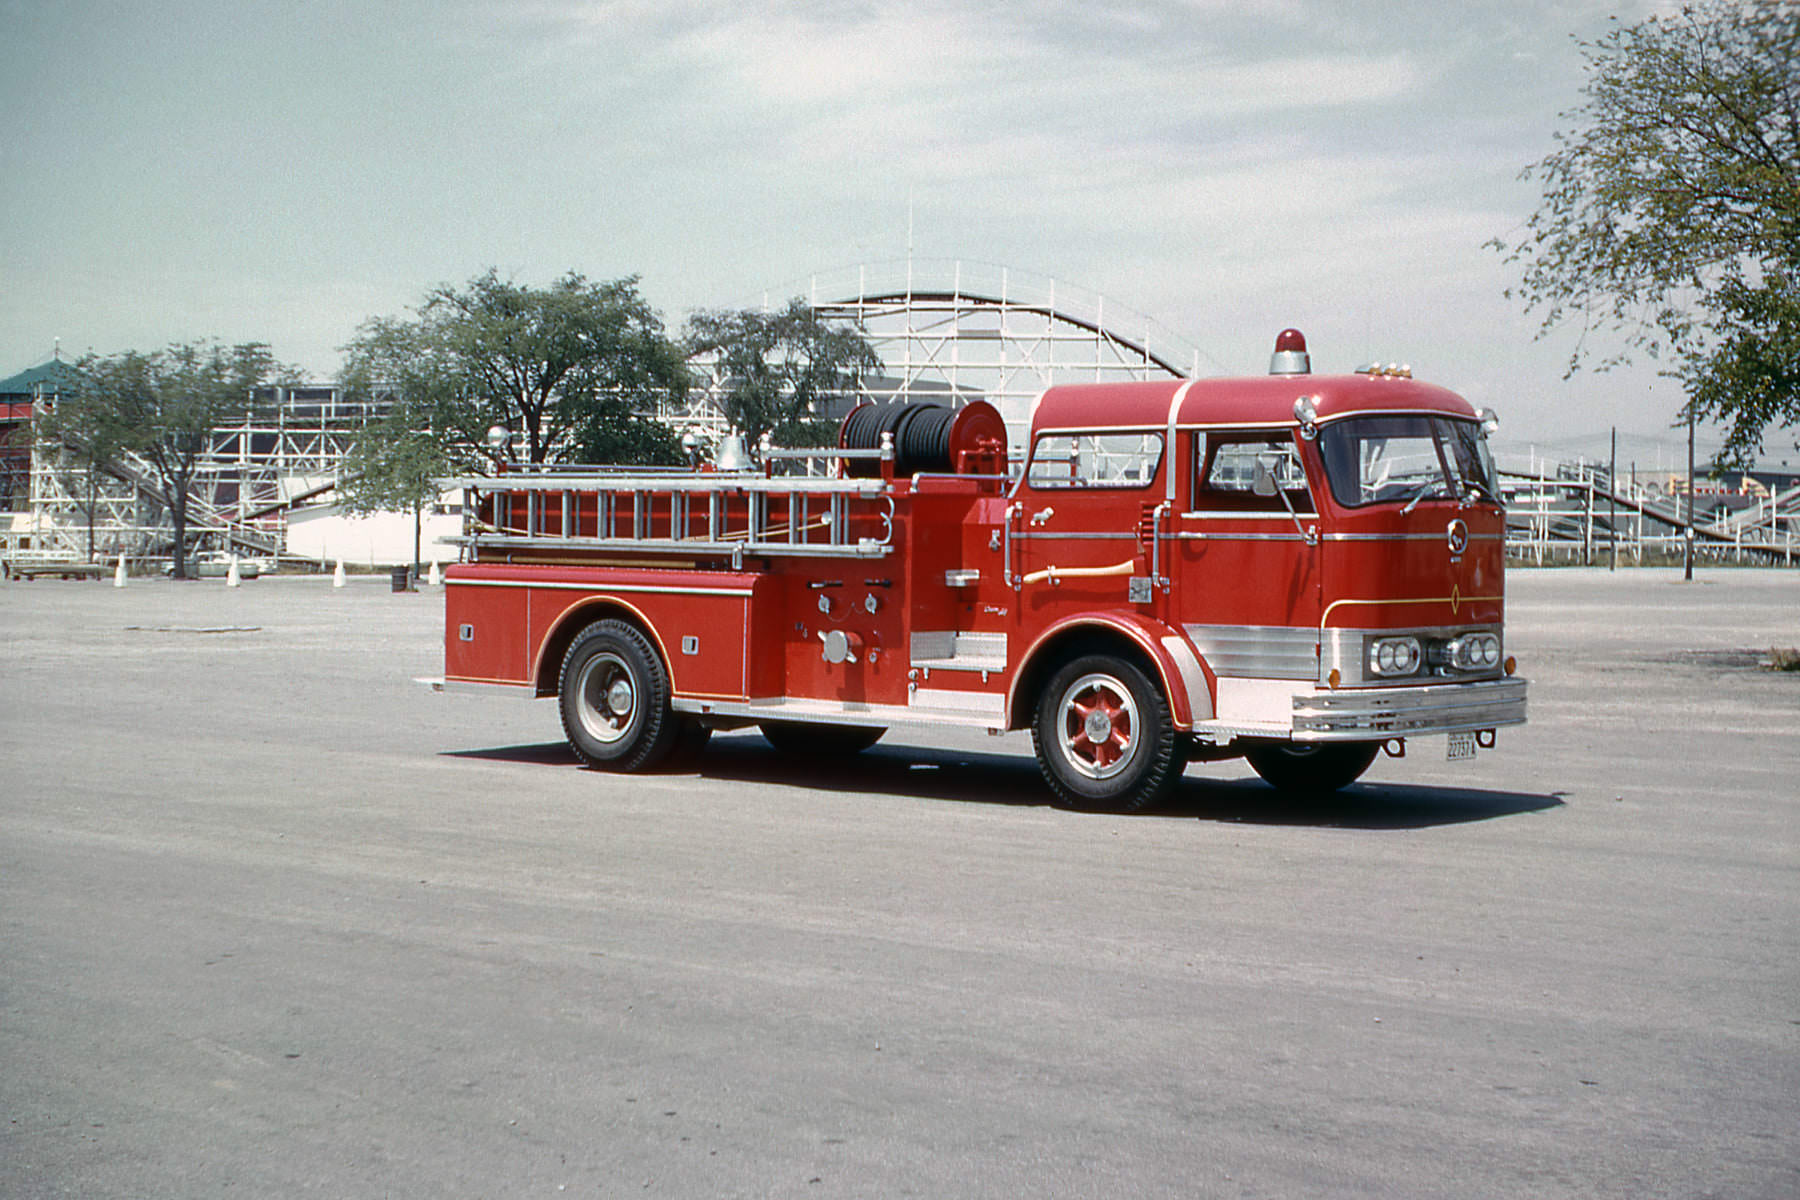 Mack fire truck No. 13 at the CNE, 1962.